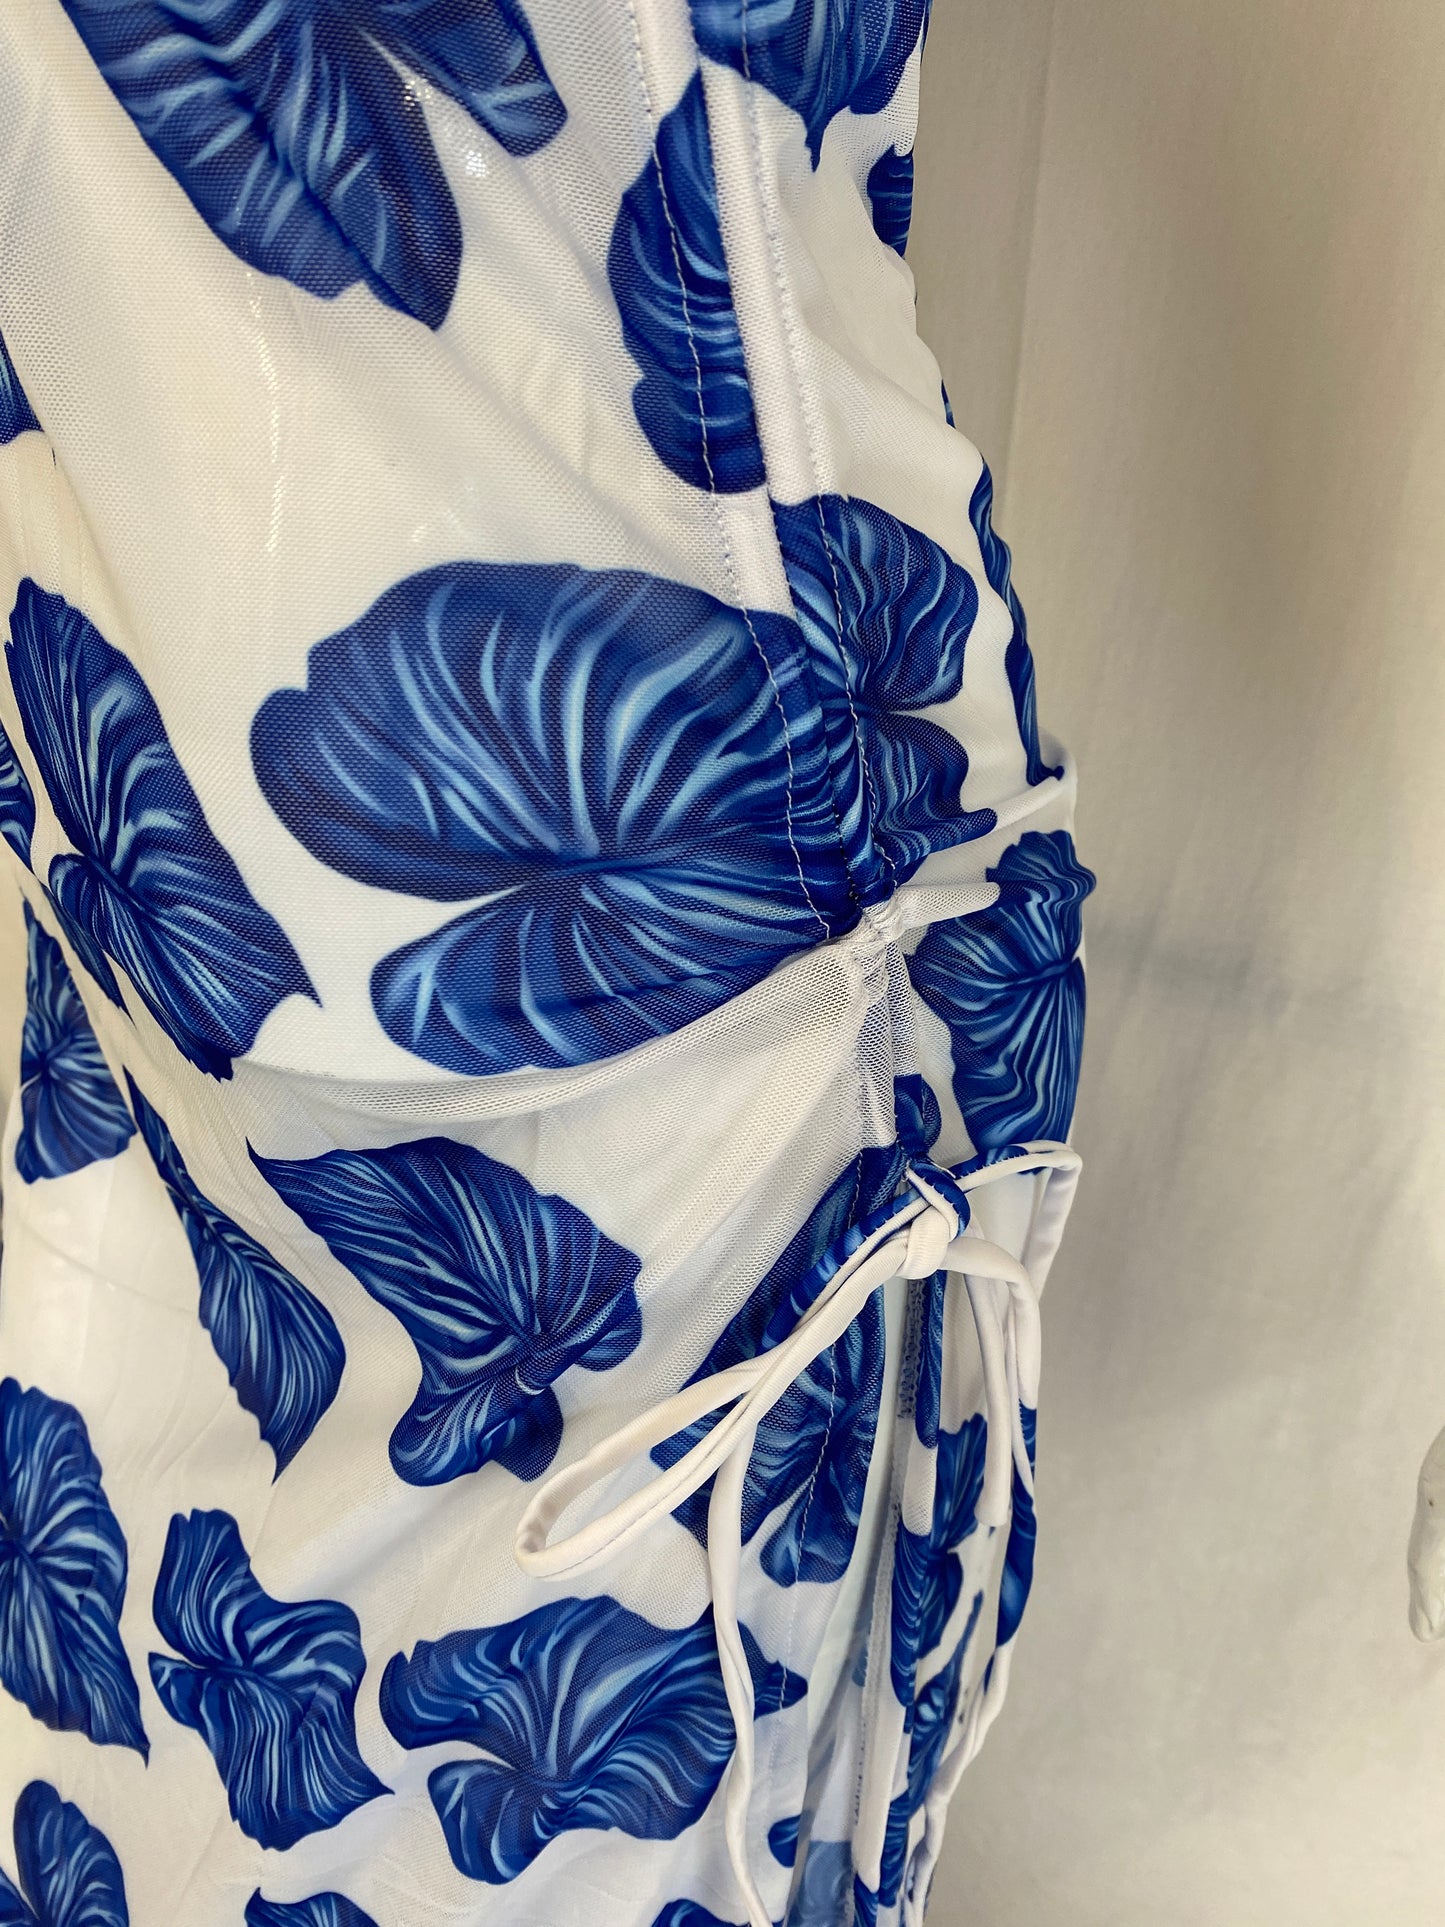 Sheer Blue & White Leafy Beach Cover Up Maxi Dress Size 8